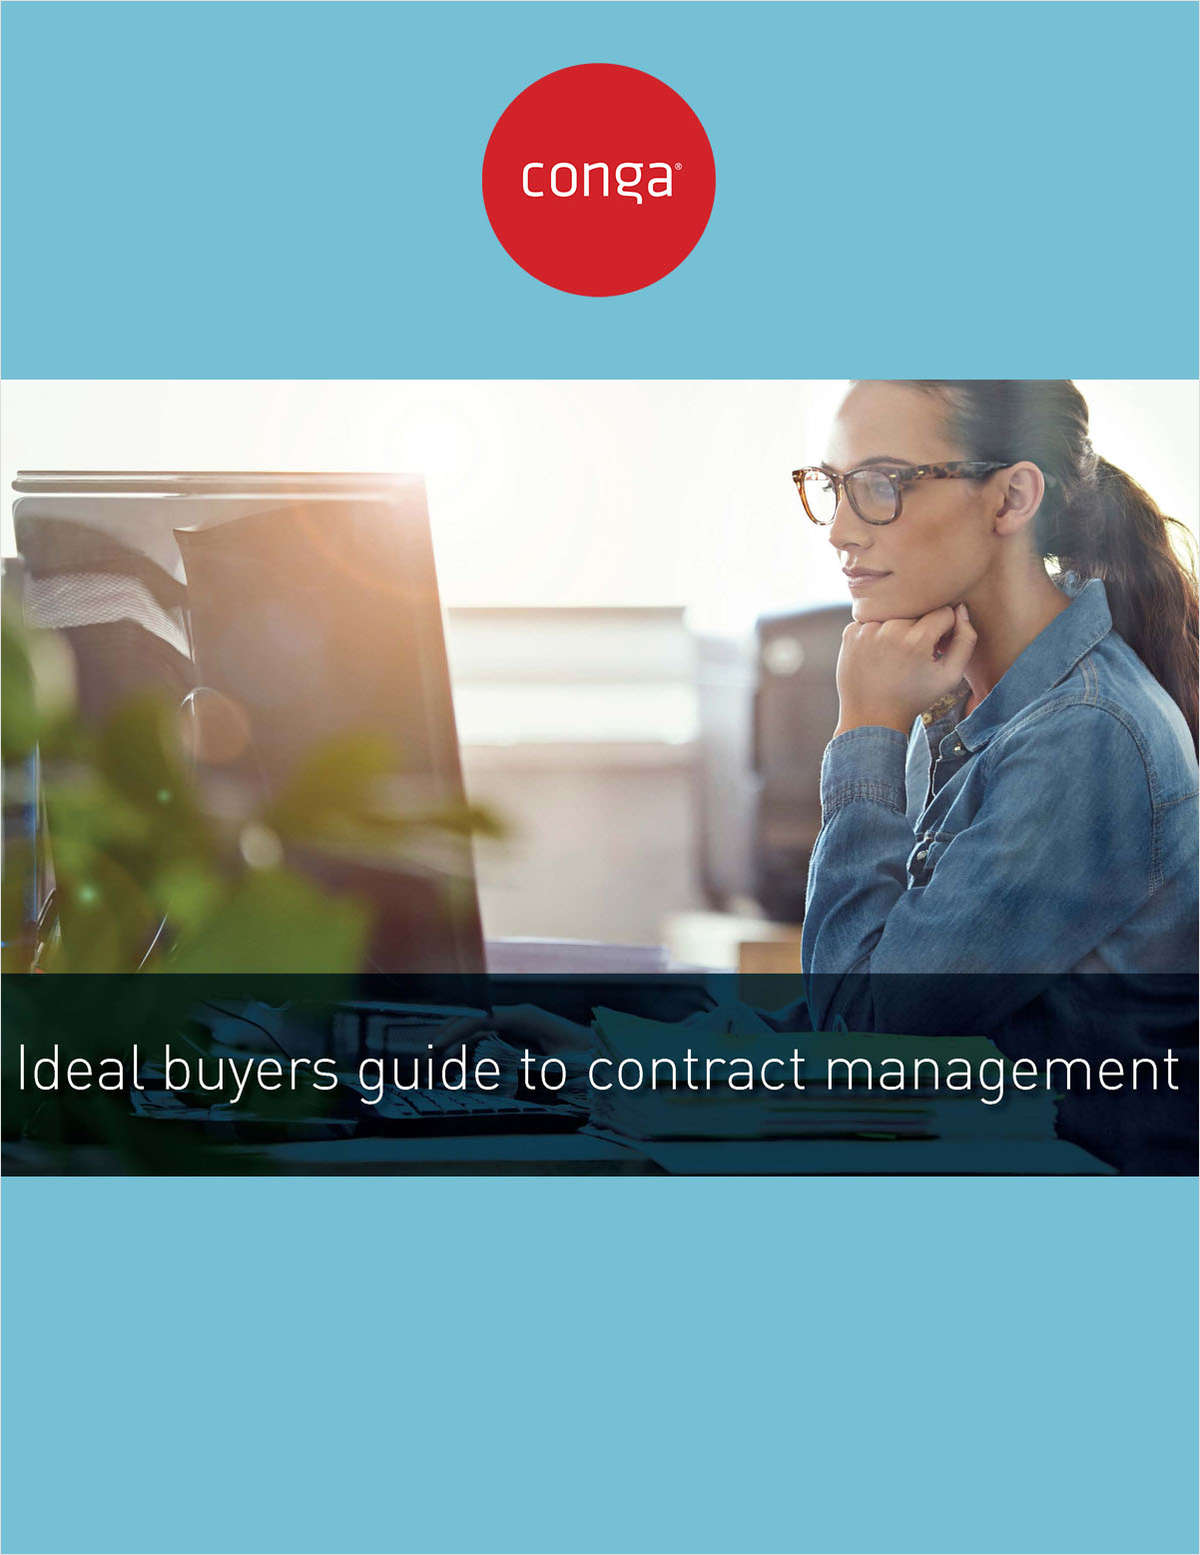 Buyers Guide to Contract Management